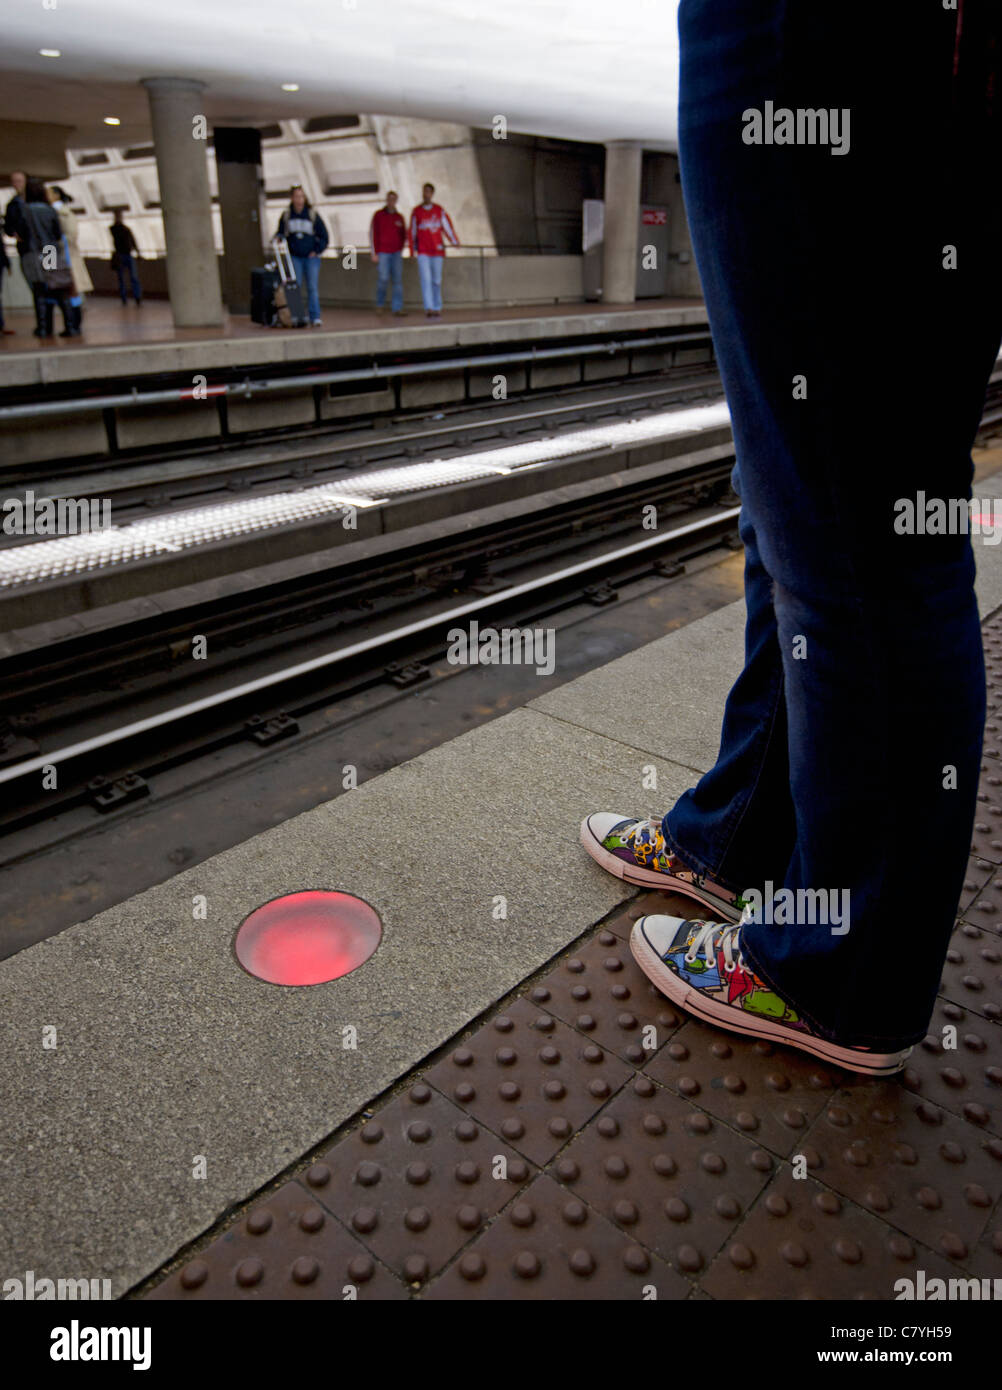 Washington DC Metro Rail Station with a view of a persons feet waiting for the subway train. Stock Photo